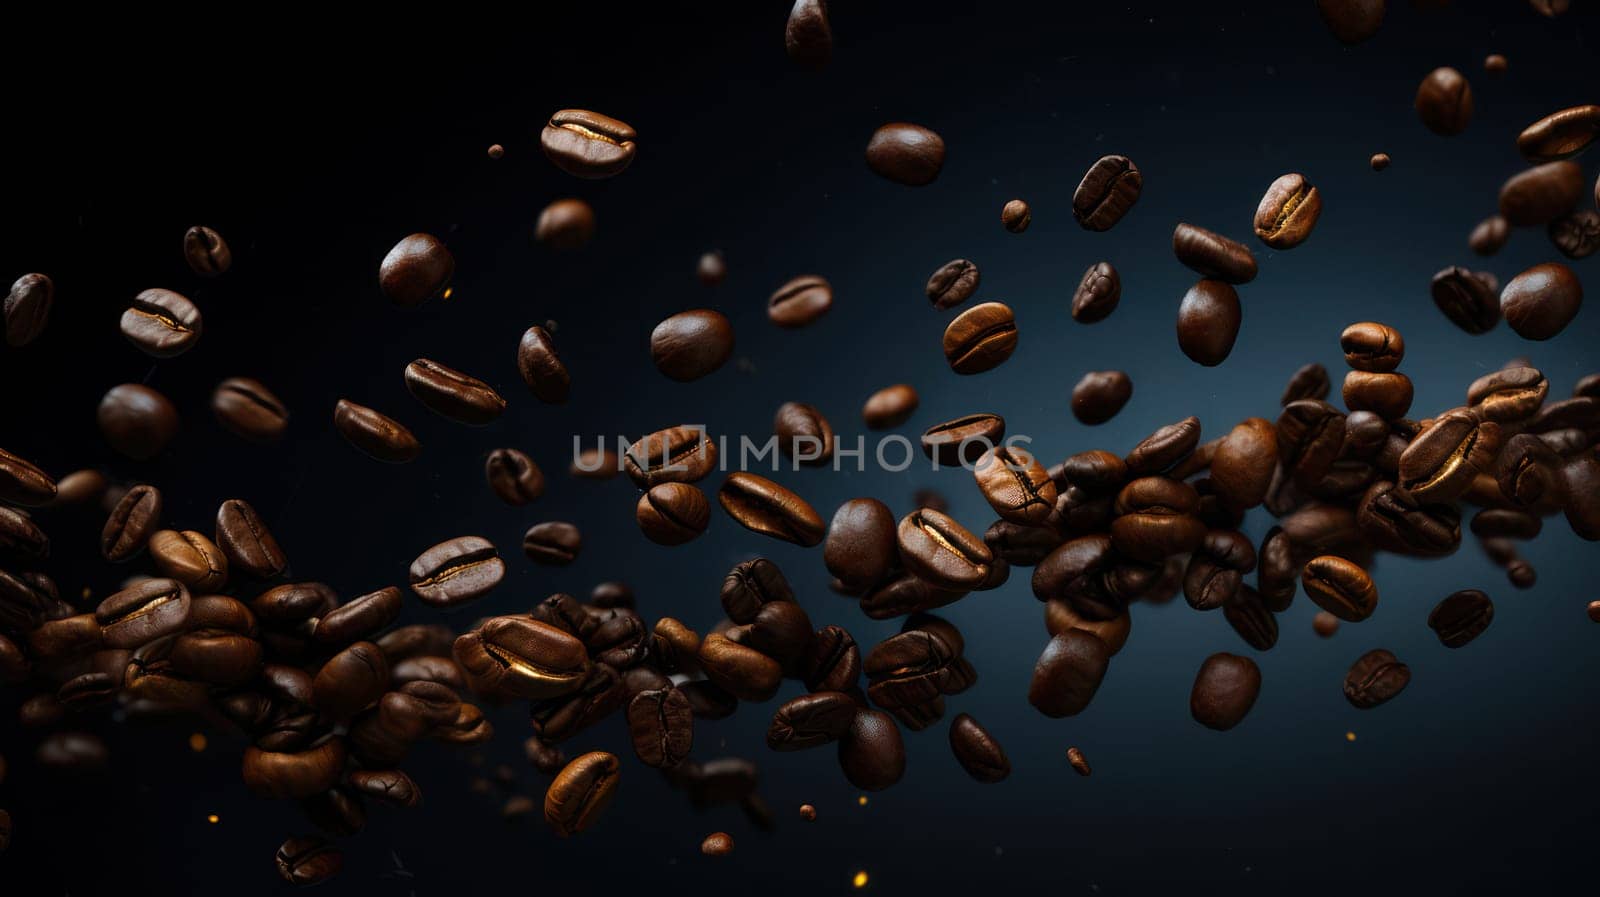 Roast Caffeine Brown Espresso: A Captivating Closeup of Aromatic Coffee Beans in a Natural, Macro Composition.